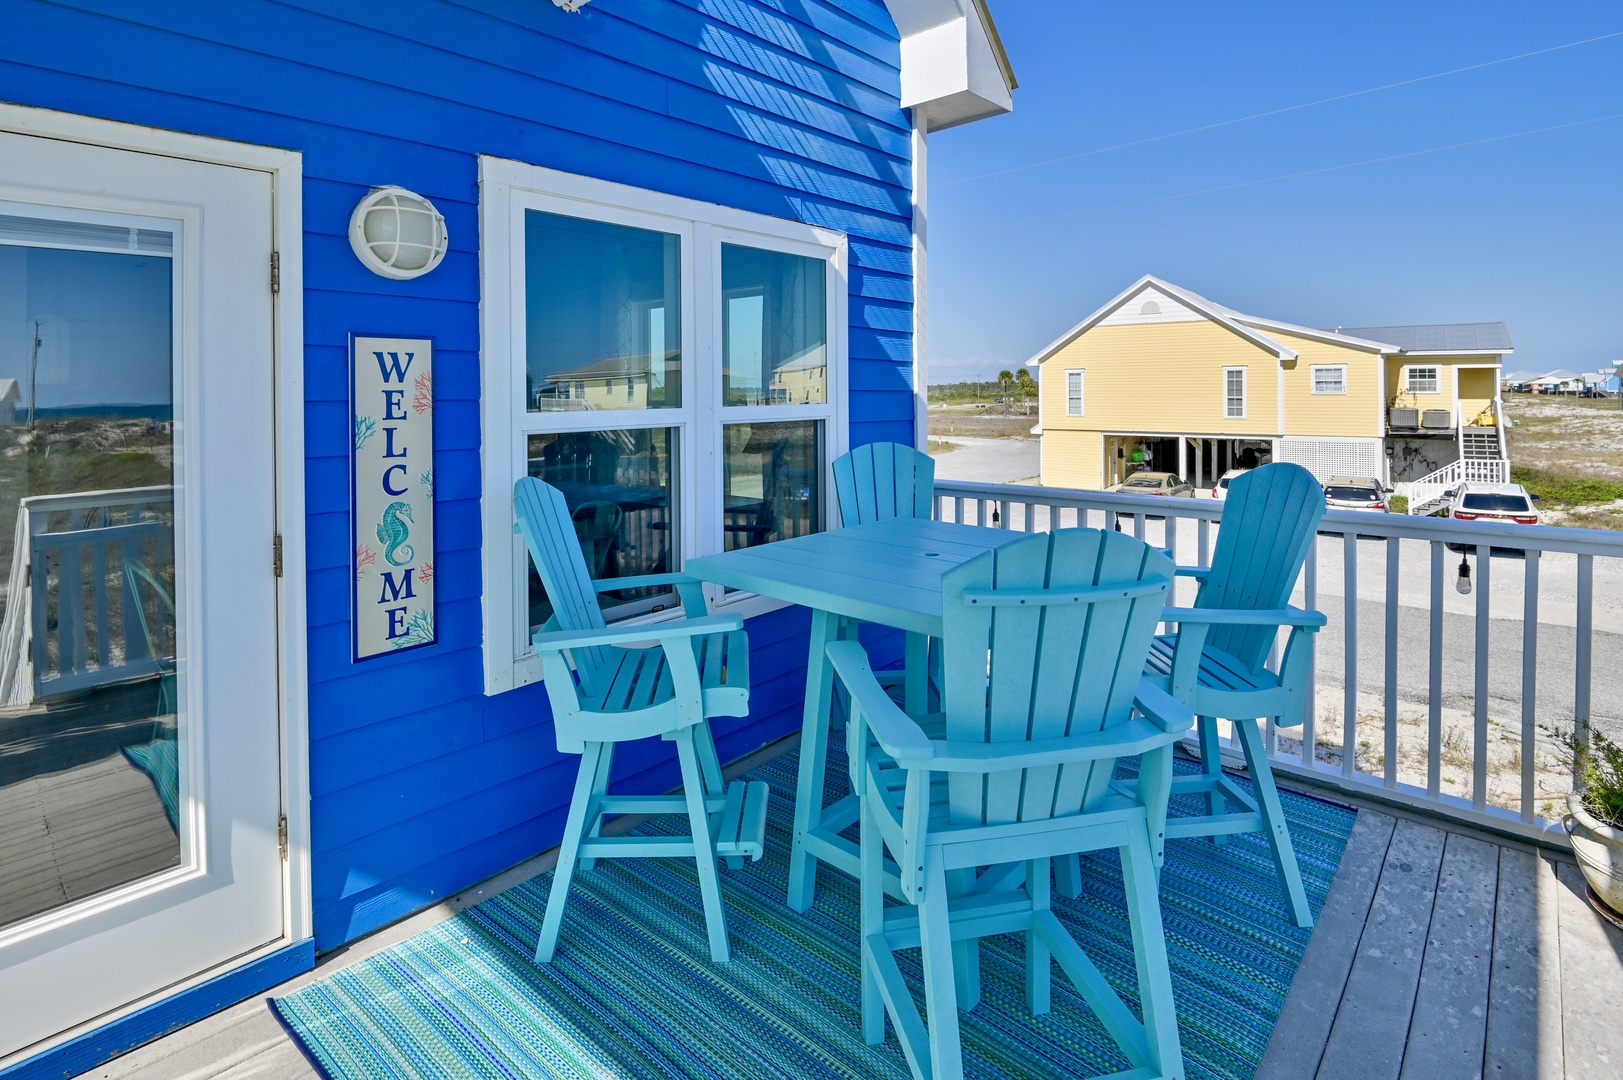 Sip morning coffee or lounge the day away on the sunny deck